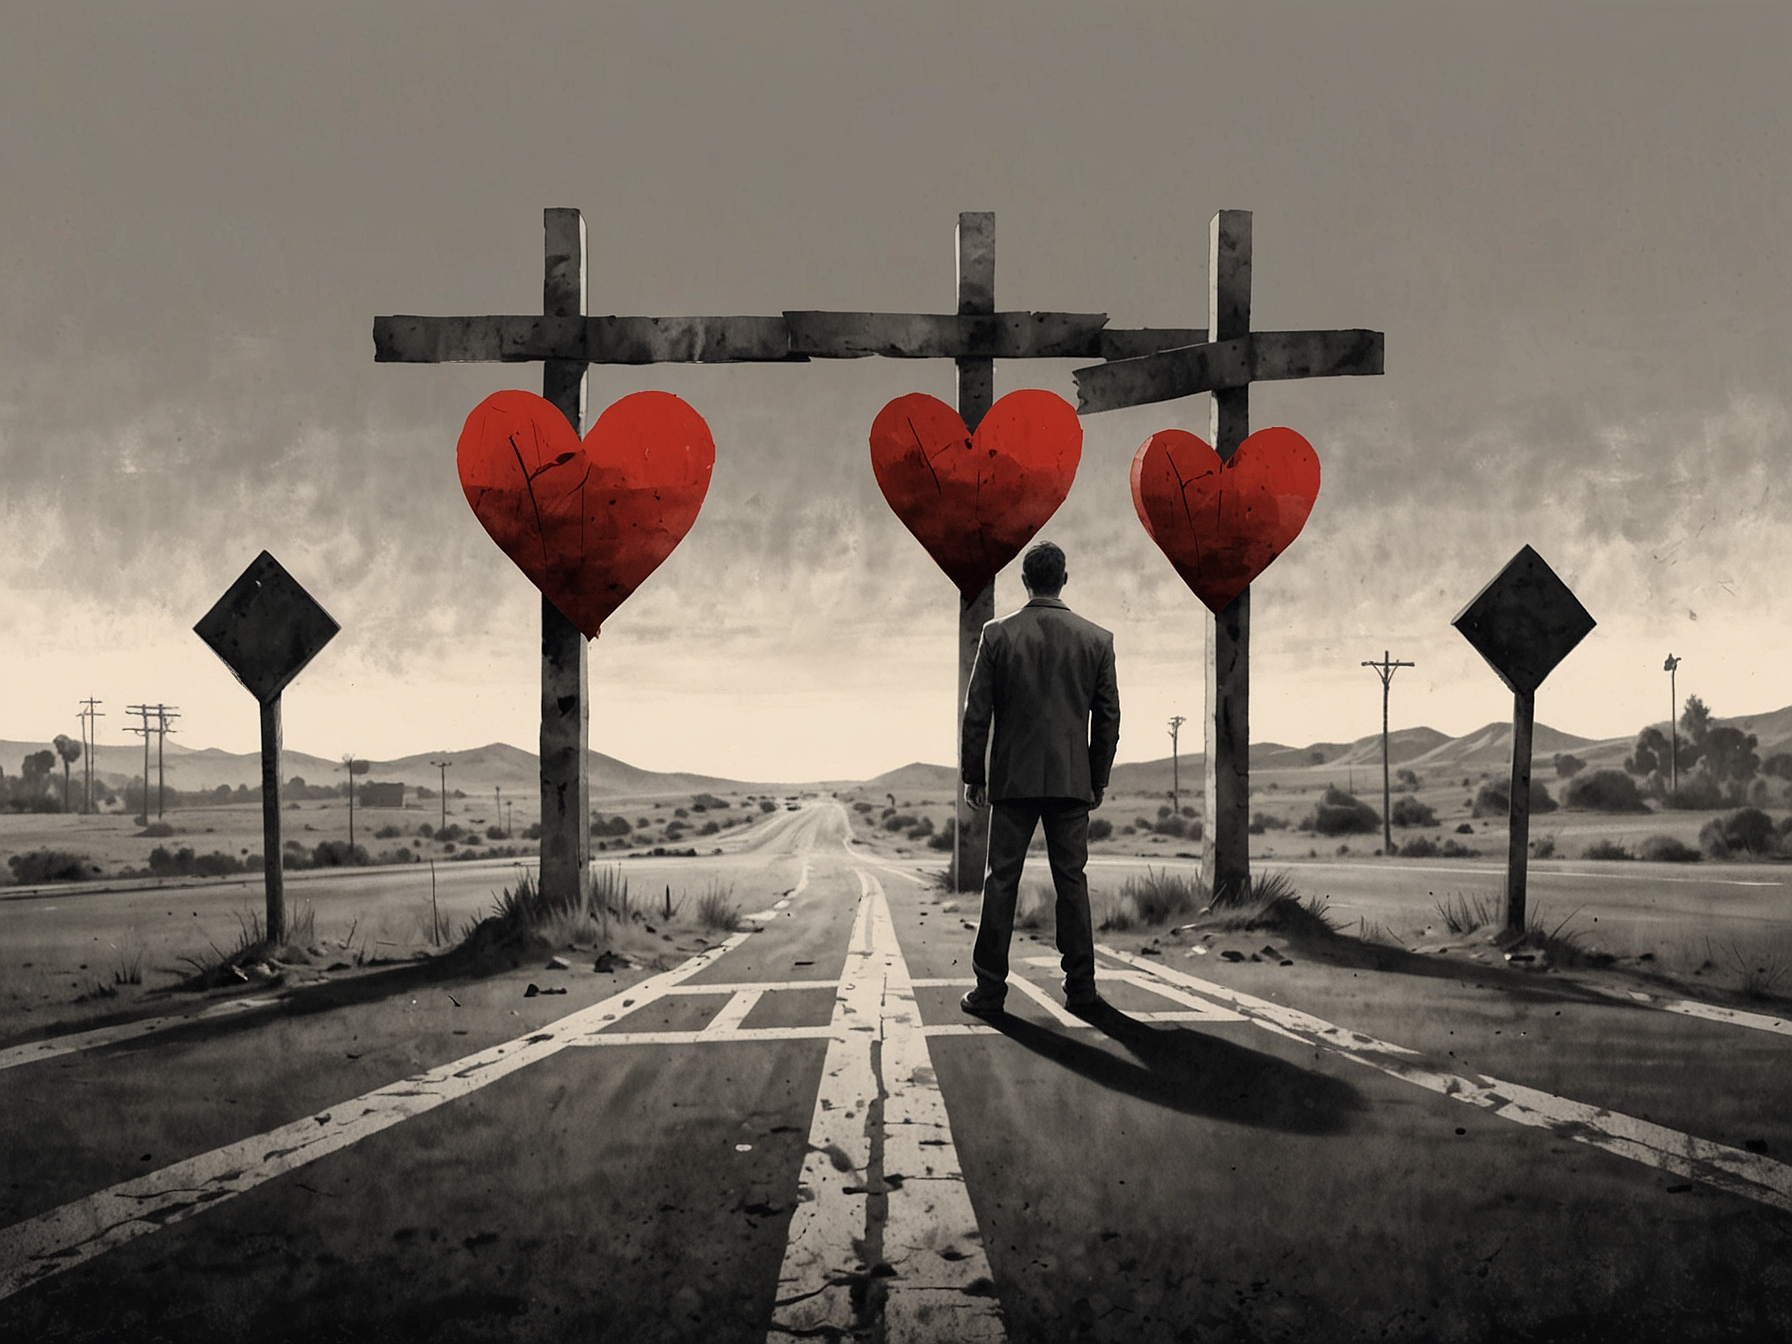 A man standing at a crossroads, holding two fragmented hearts representing his wife and mistress, symbolizing his emotional and life-altering decision.